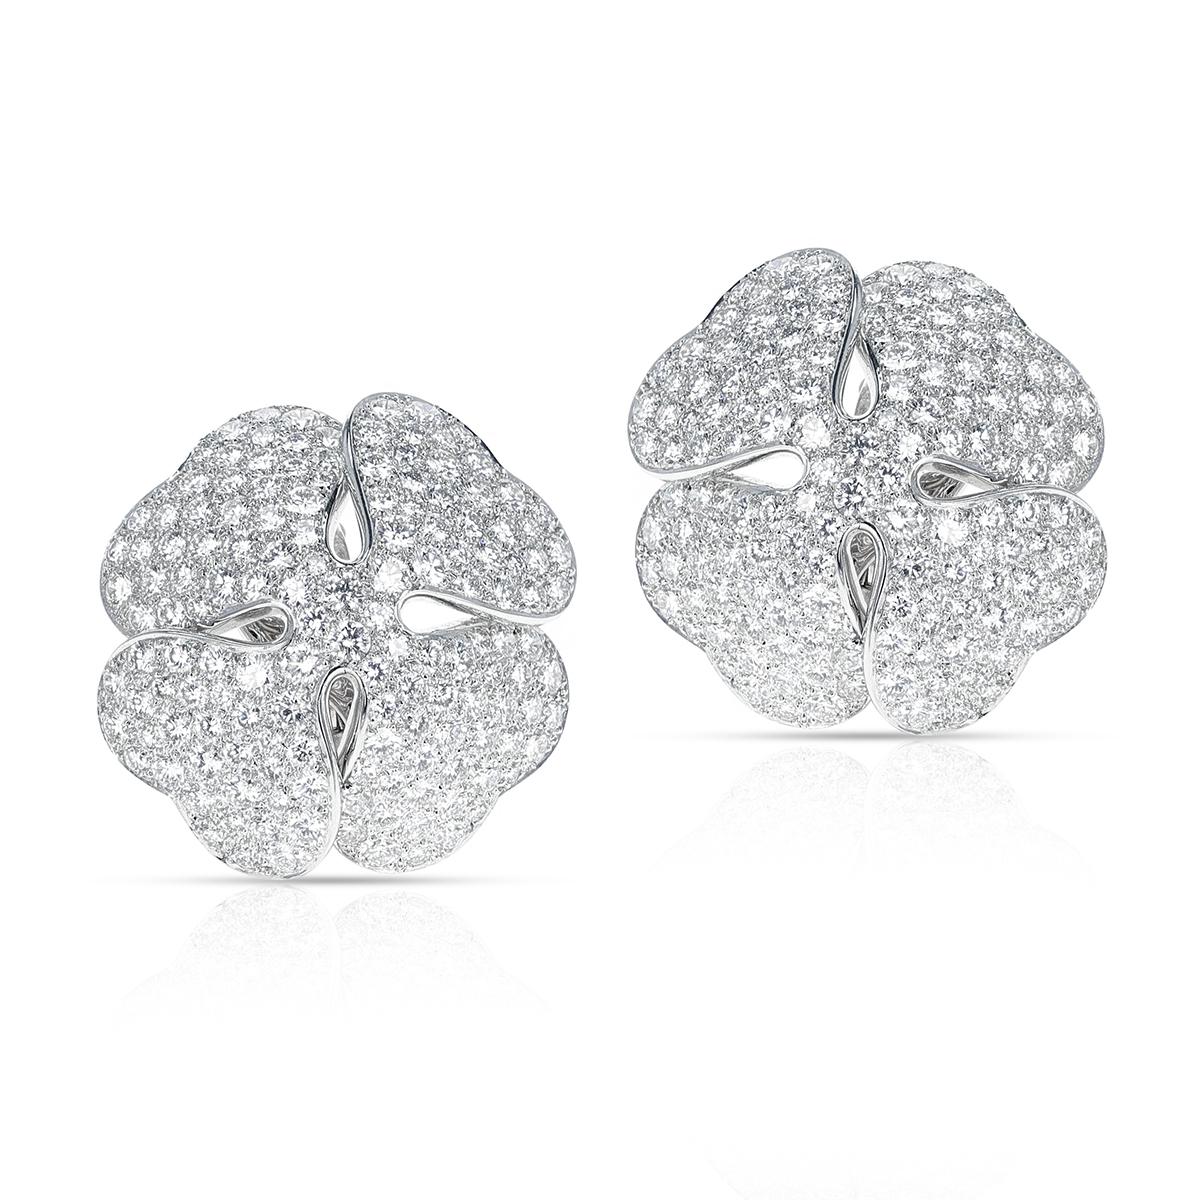 A collector pair of Cartier Anniversary Edition Clover Diamond Earrings. The earring weighs 29.17 grams. Part of Set with Ring. The dimensions of the earring are 1 1/8